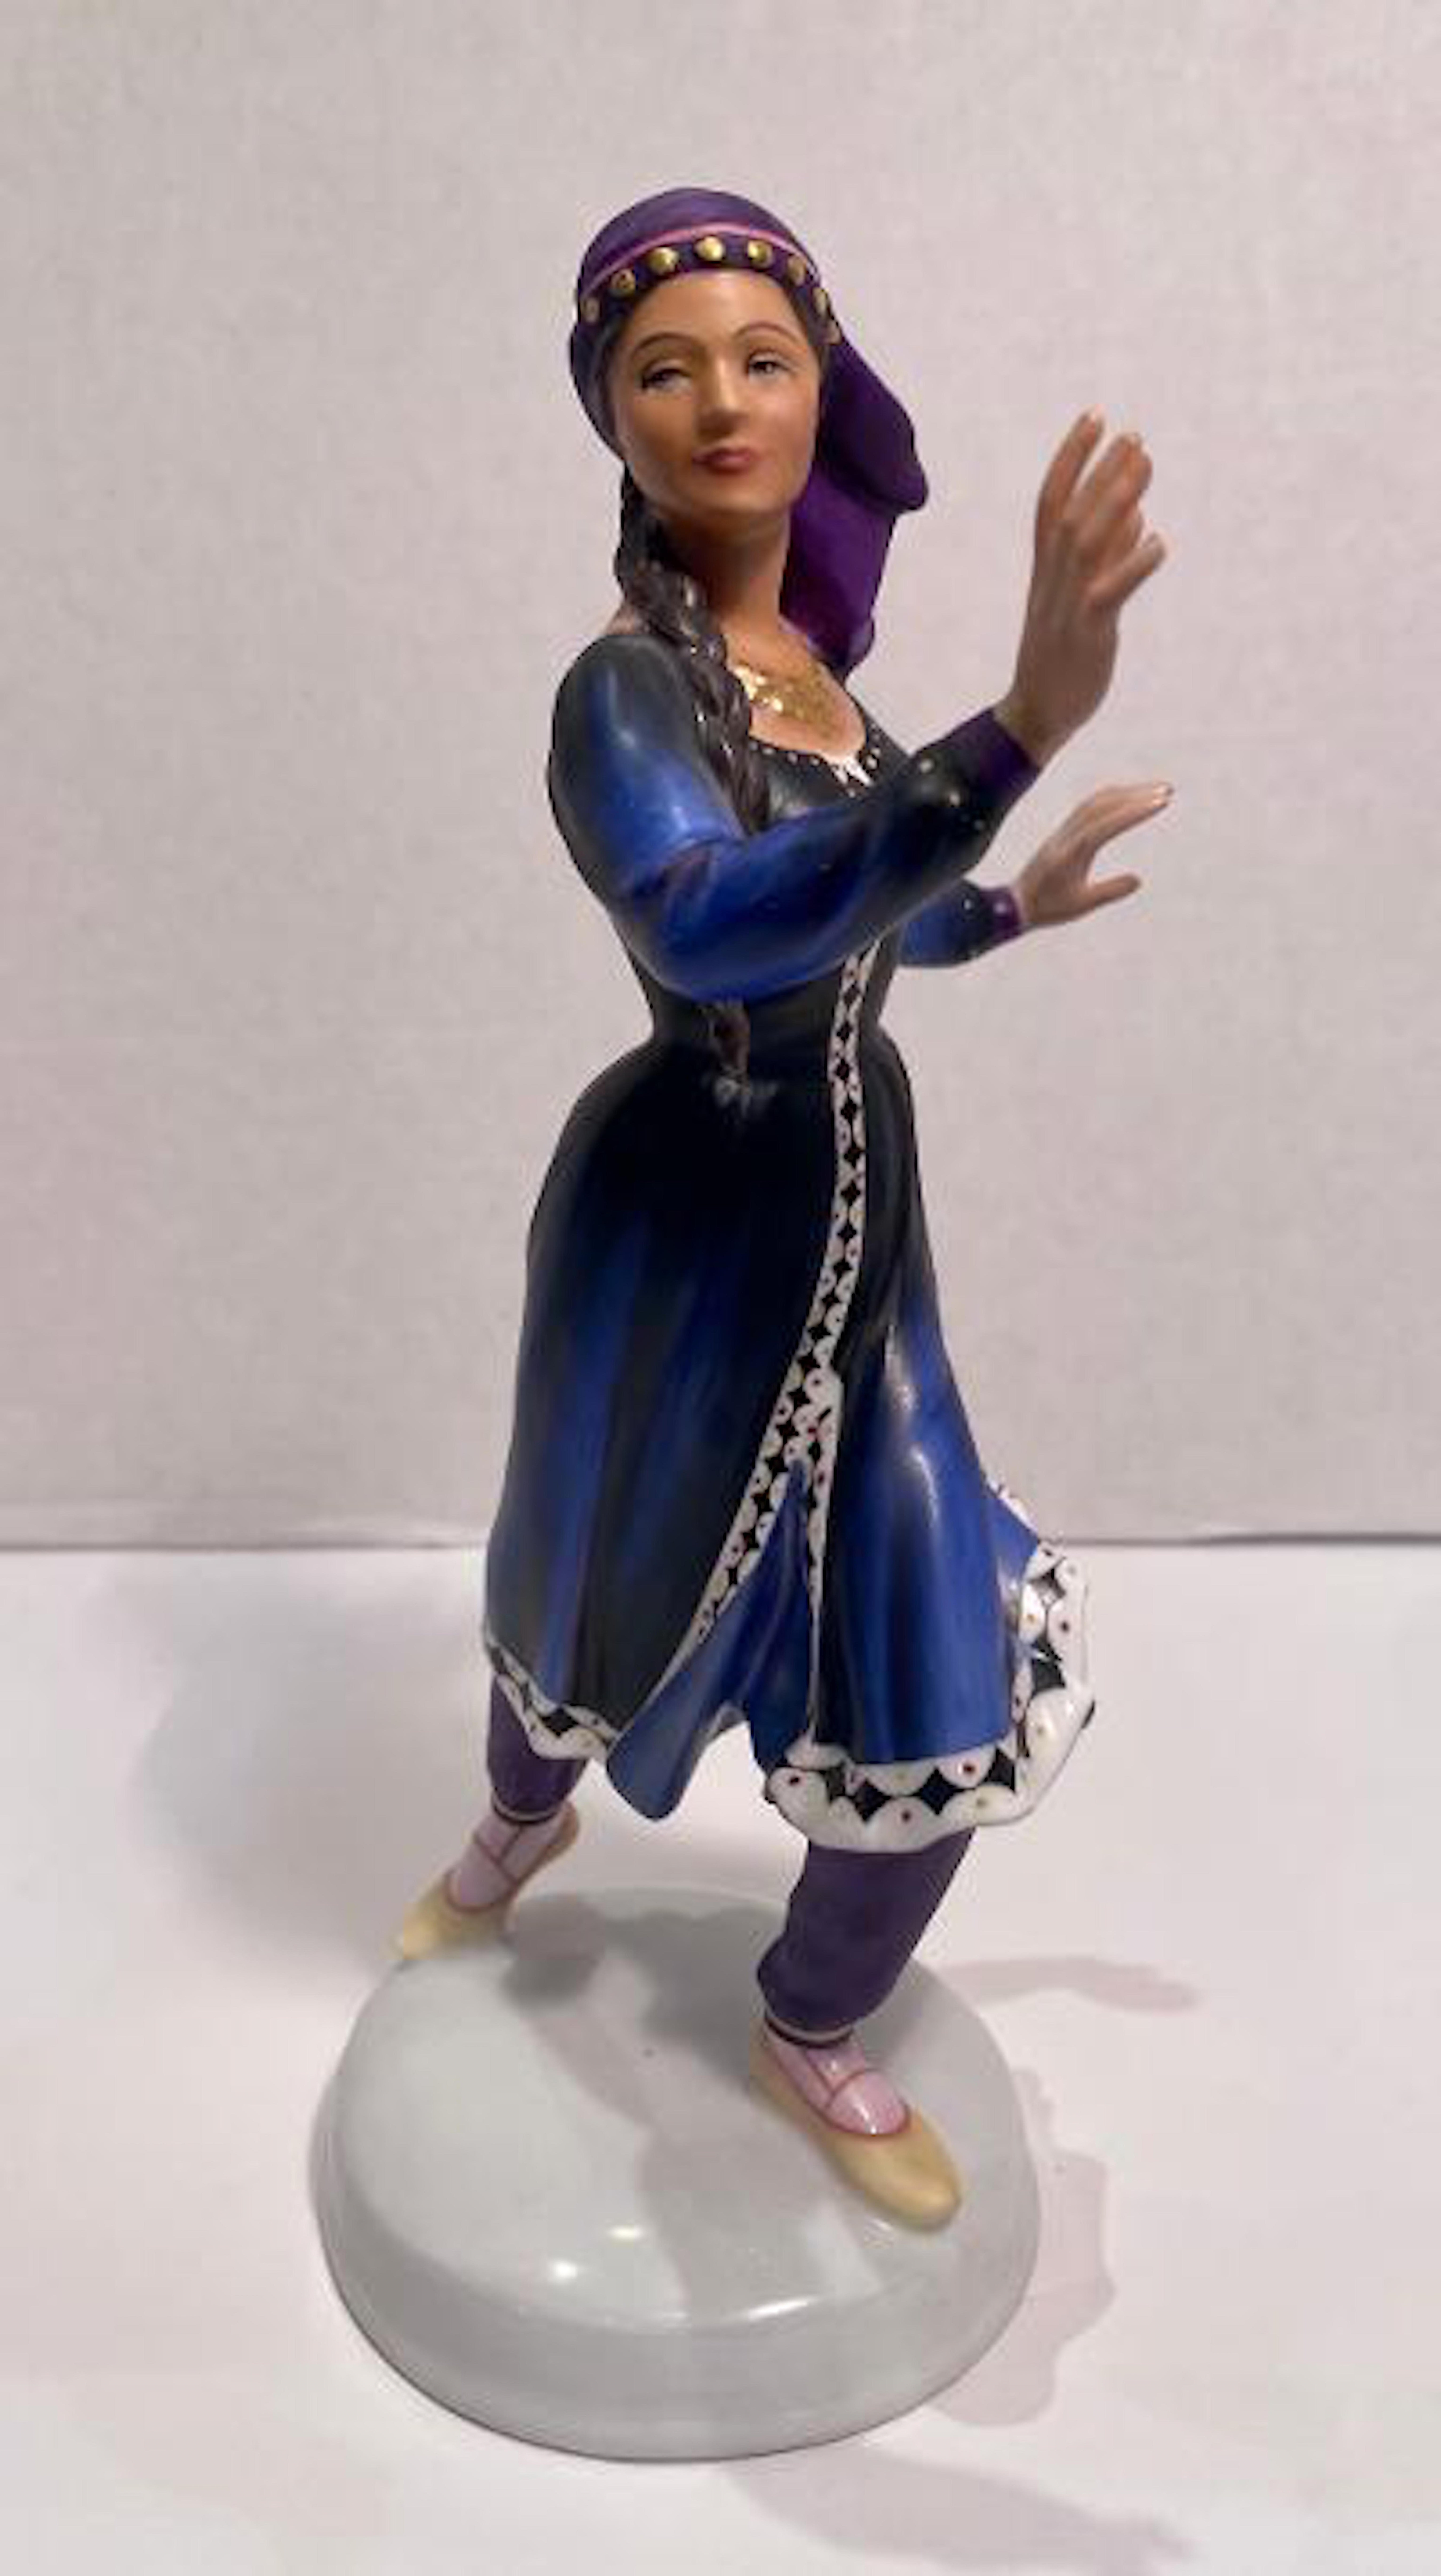 Other Royal Doulton “Dancers of the World Kurdish Dancer” Limited Edition Figurine For Sale